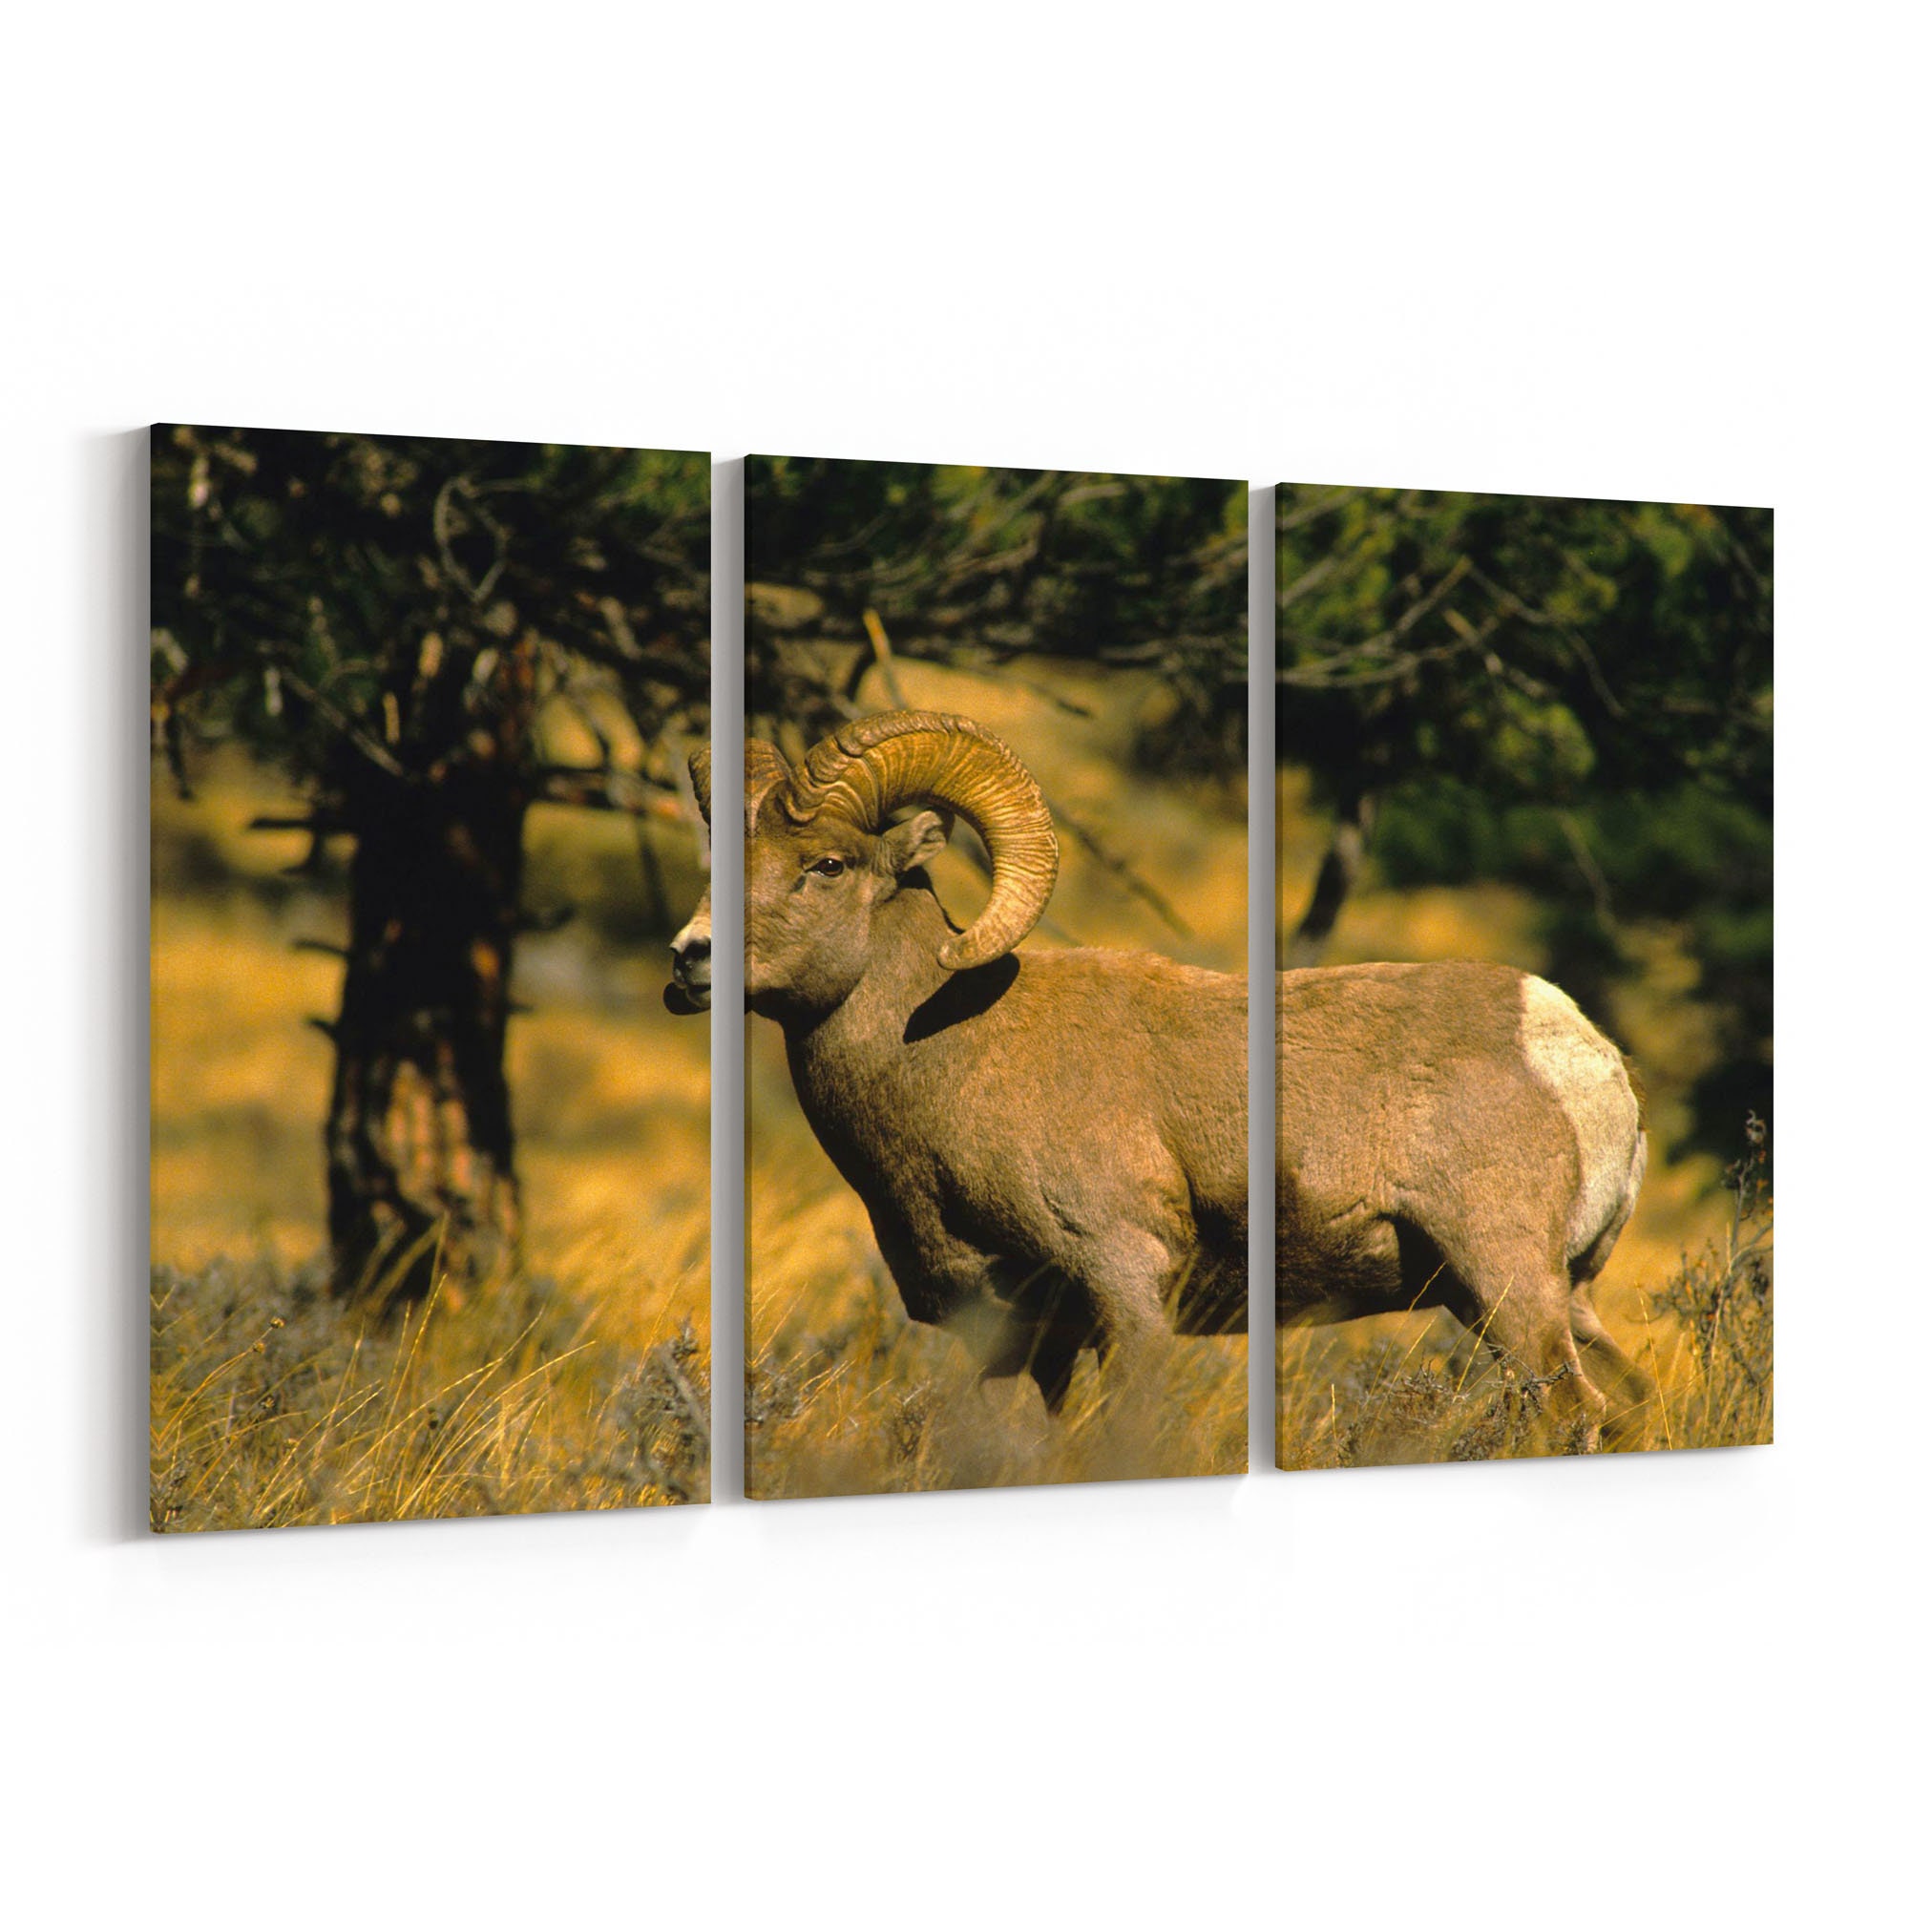 Ram Canvas Print Wall Art Multiple Sizes Wrapped On Wooden Frame